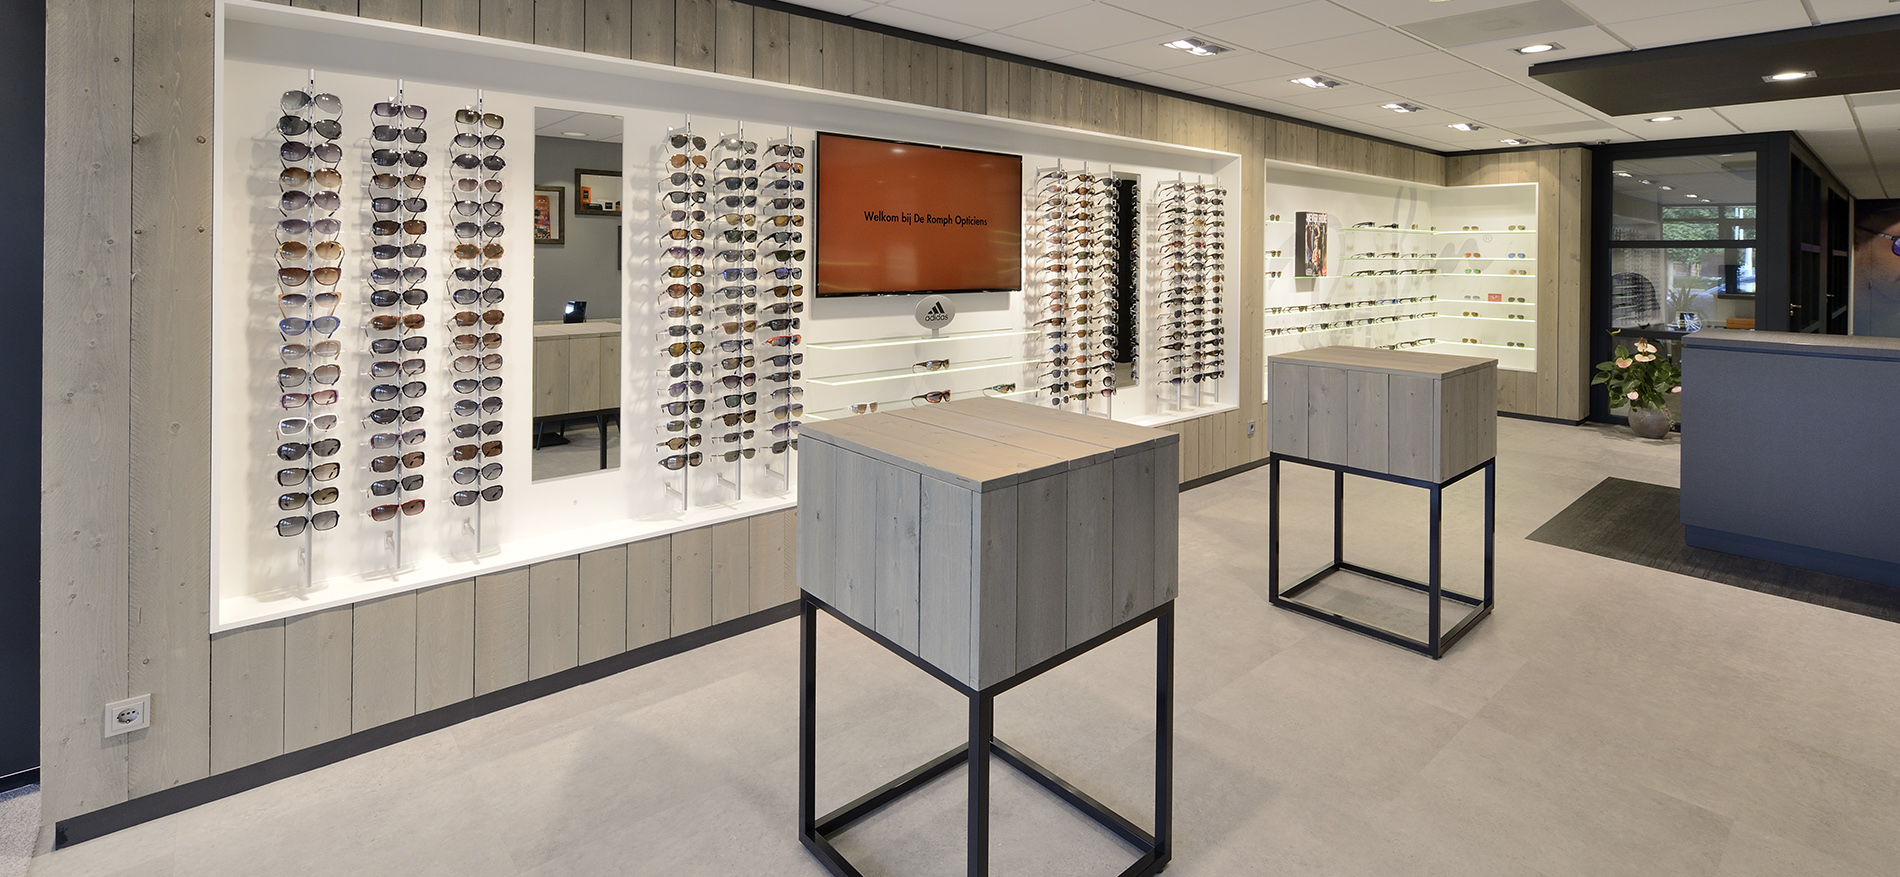 The Romph Optician: Renovation and extension of optician - 